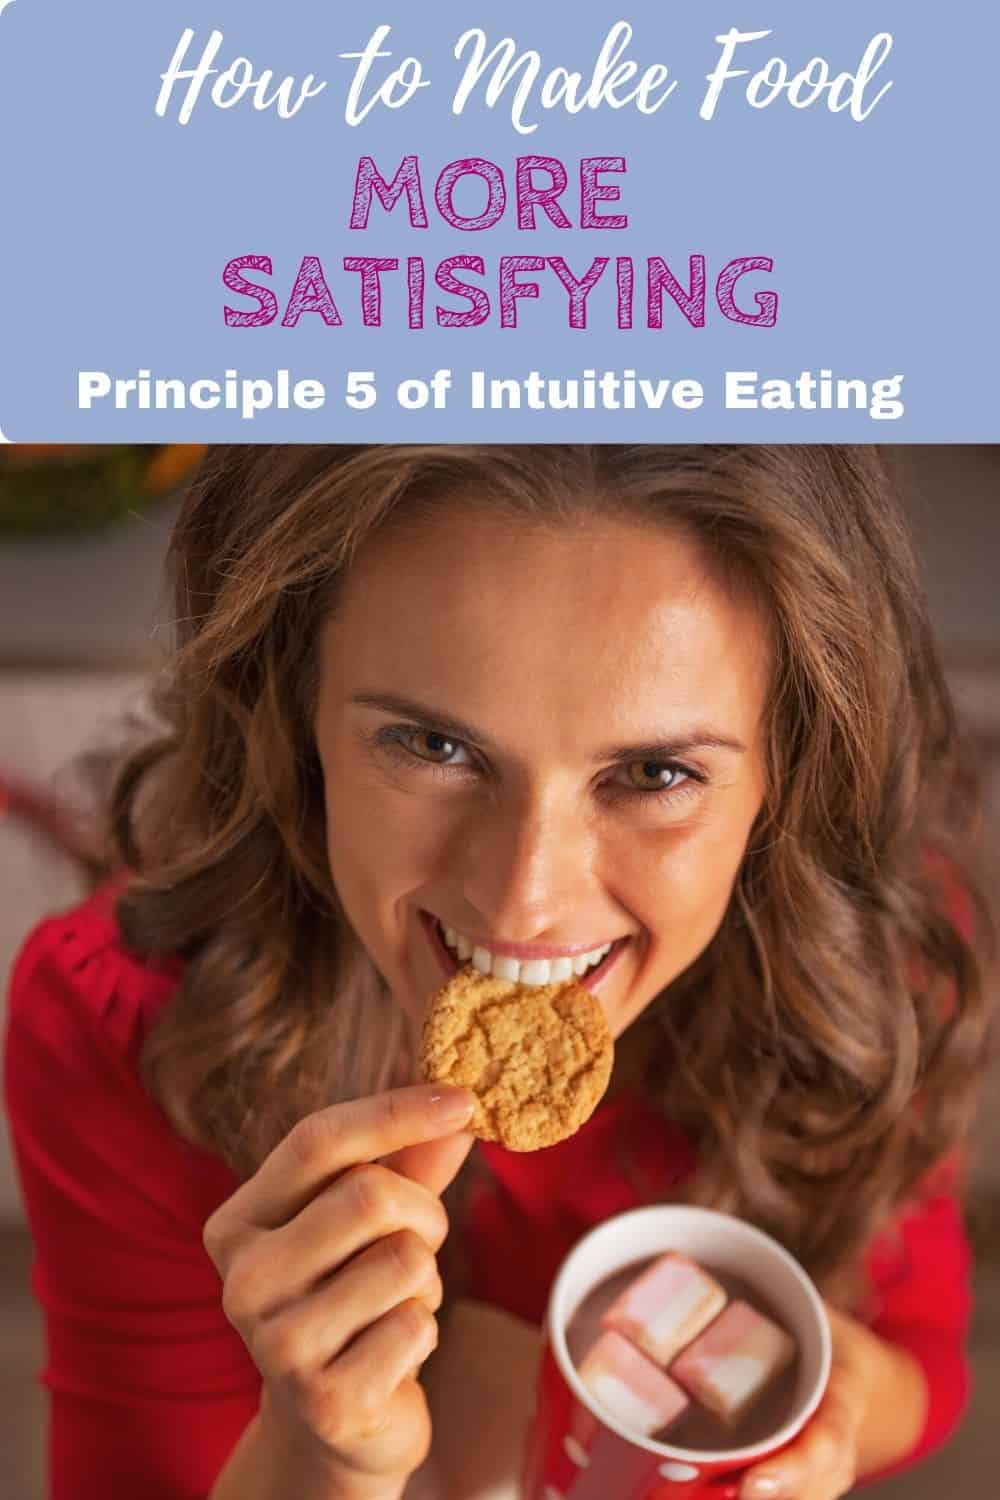 Girl eating cookie while smiling with text overlay